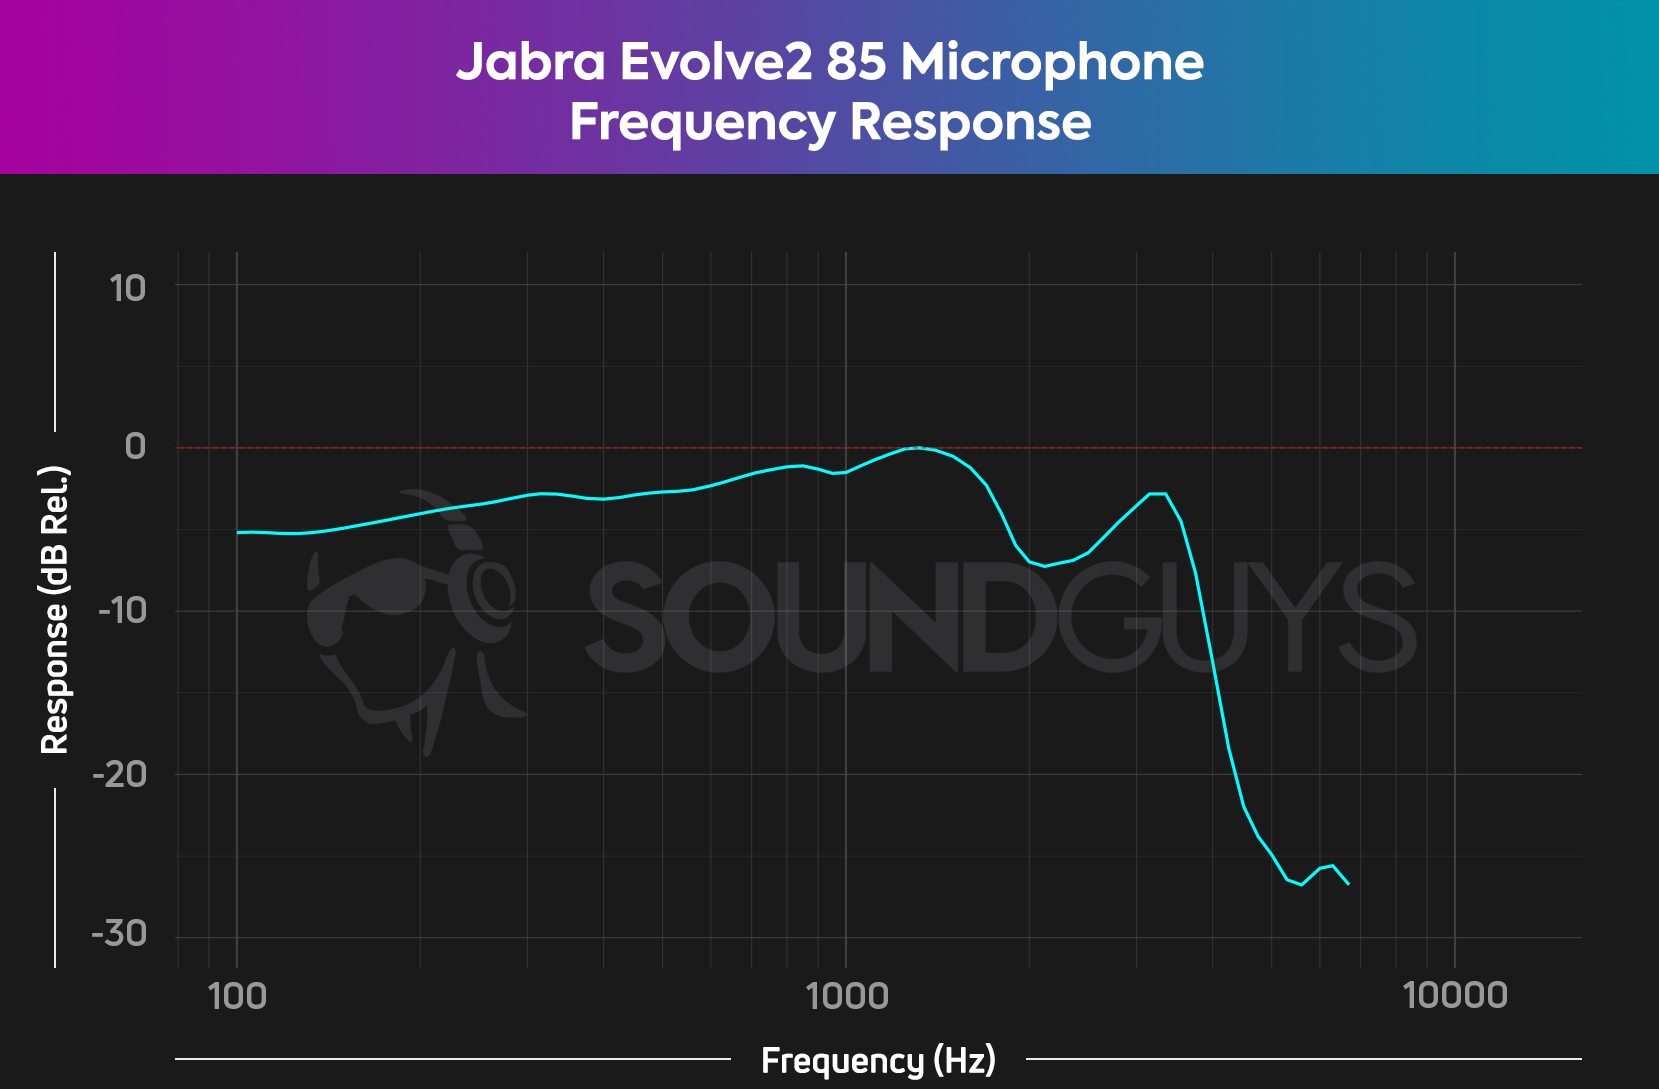 The Jabra Evolve2 85 microphone frequency response, showing a relatively flat low end response and a sharp decrease in the mid and high end.